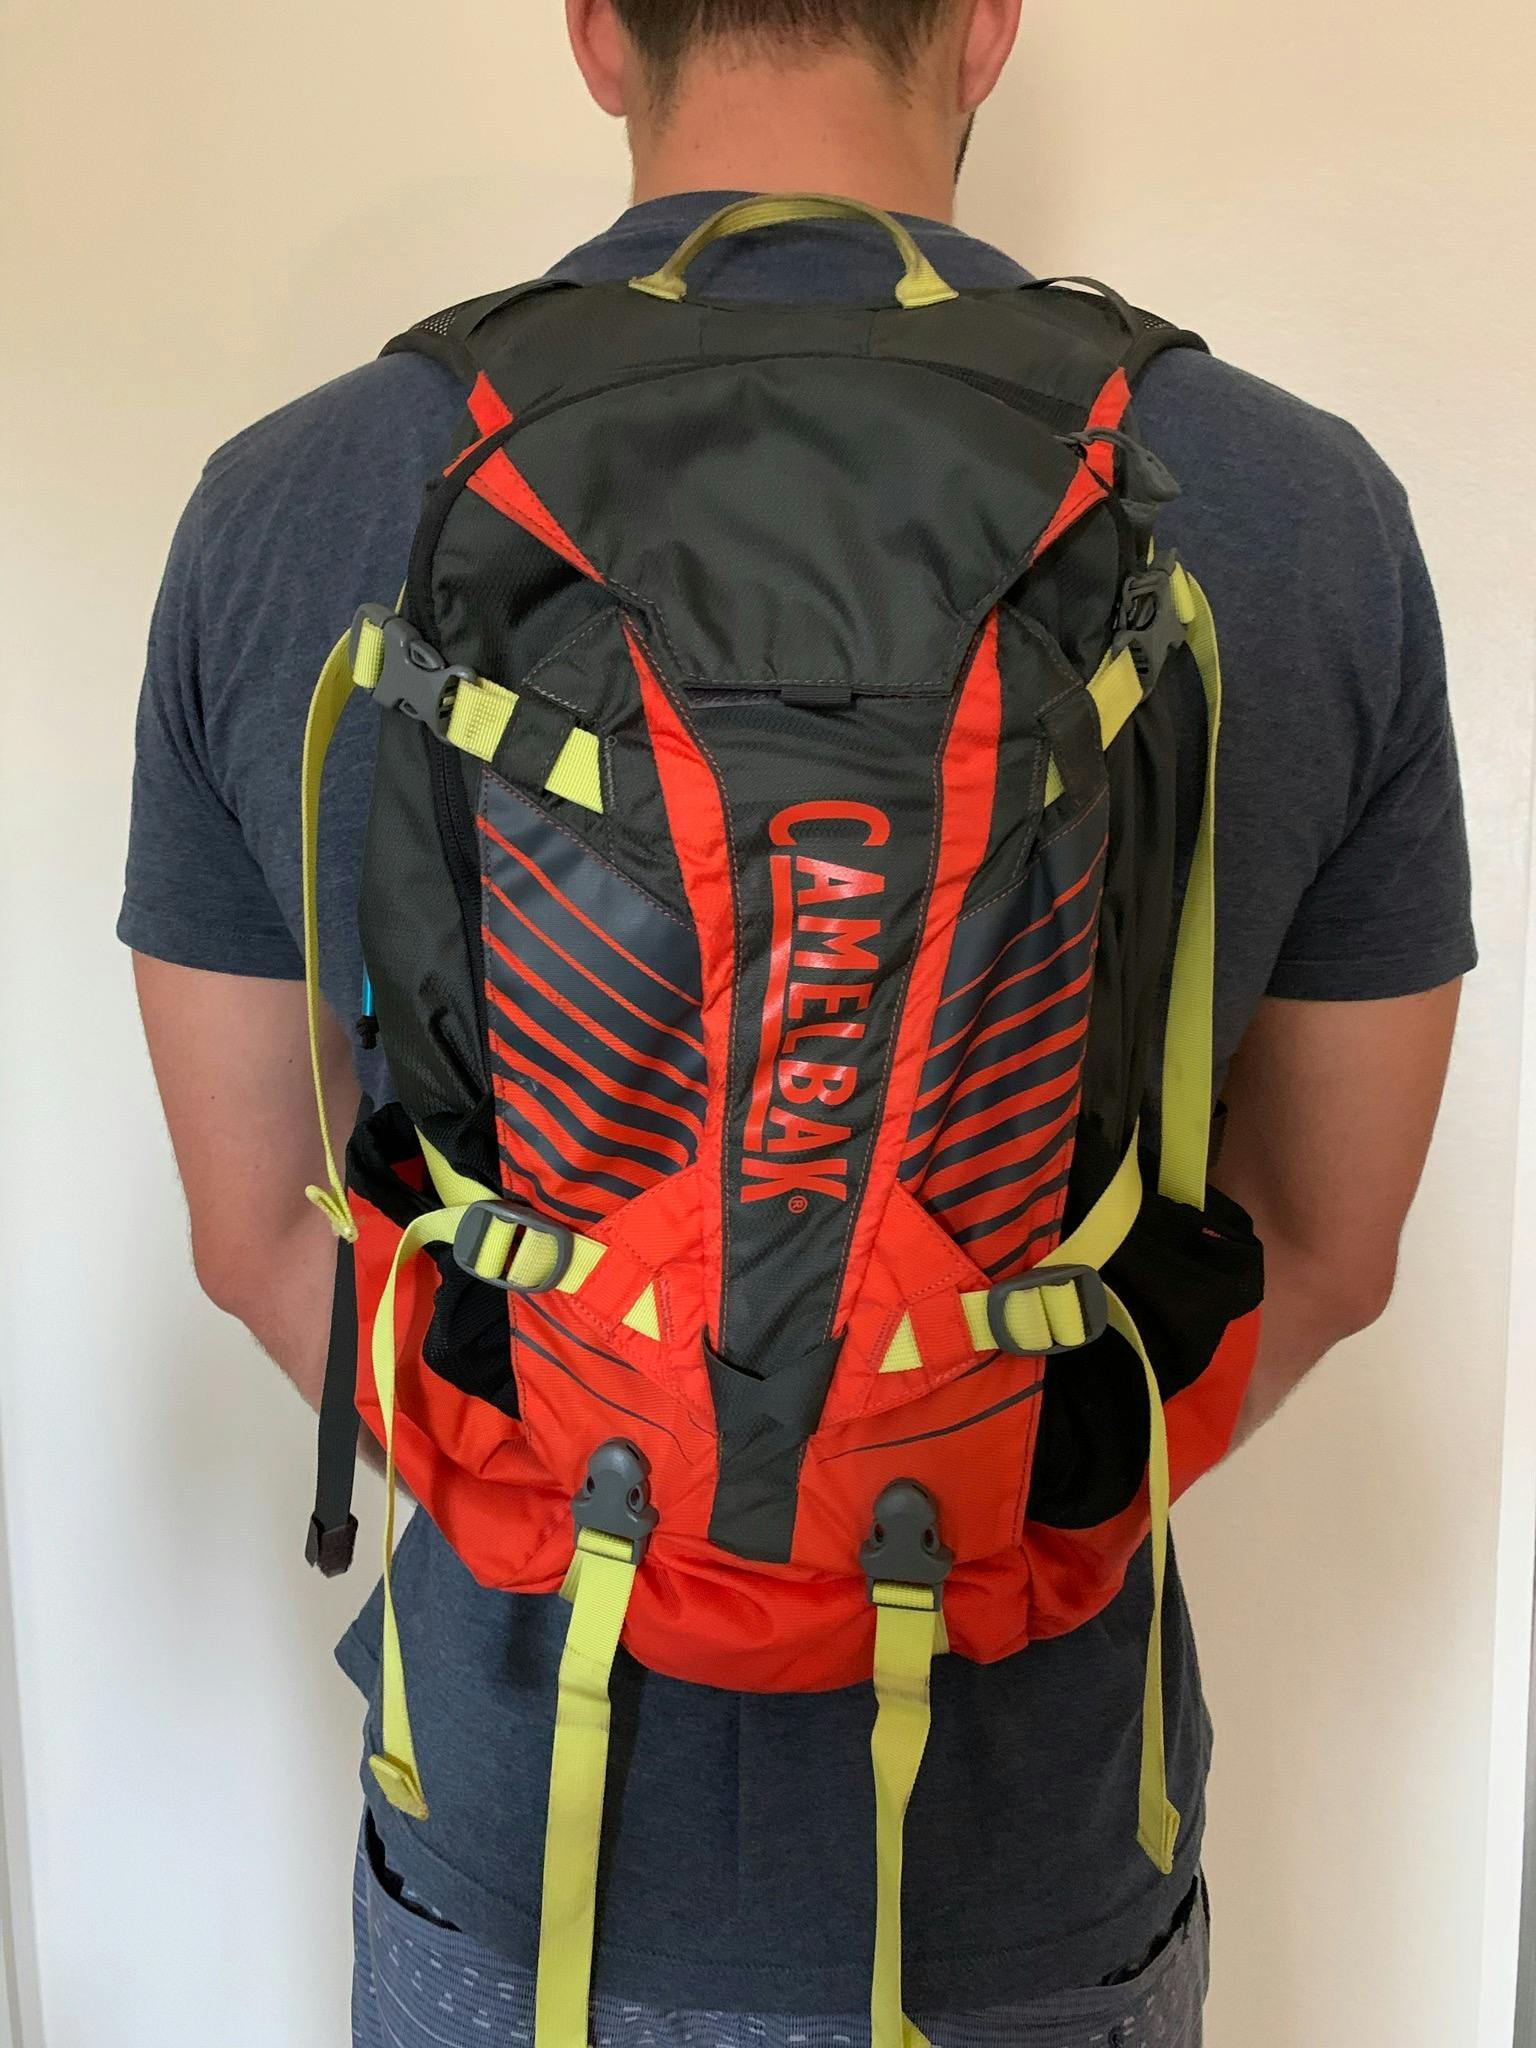 A man wears a red and black Camelbak backpack